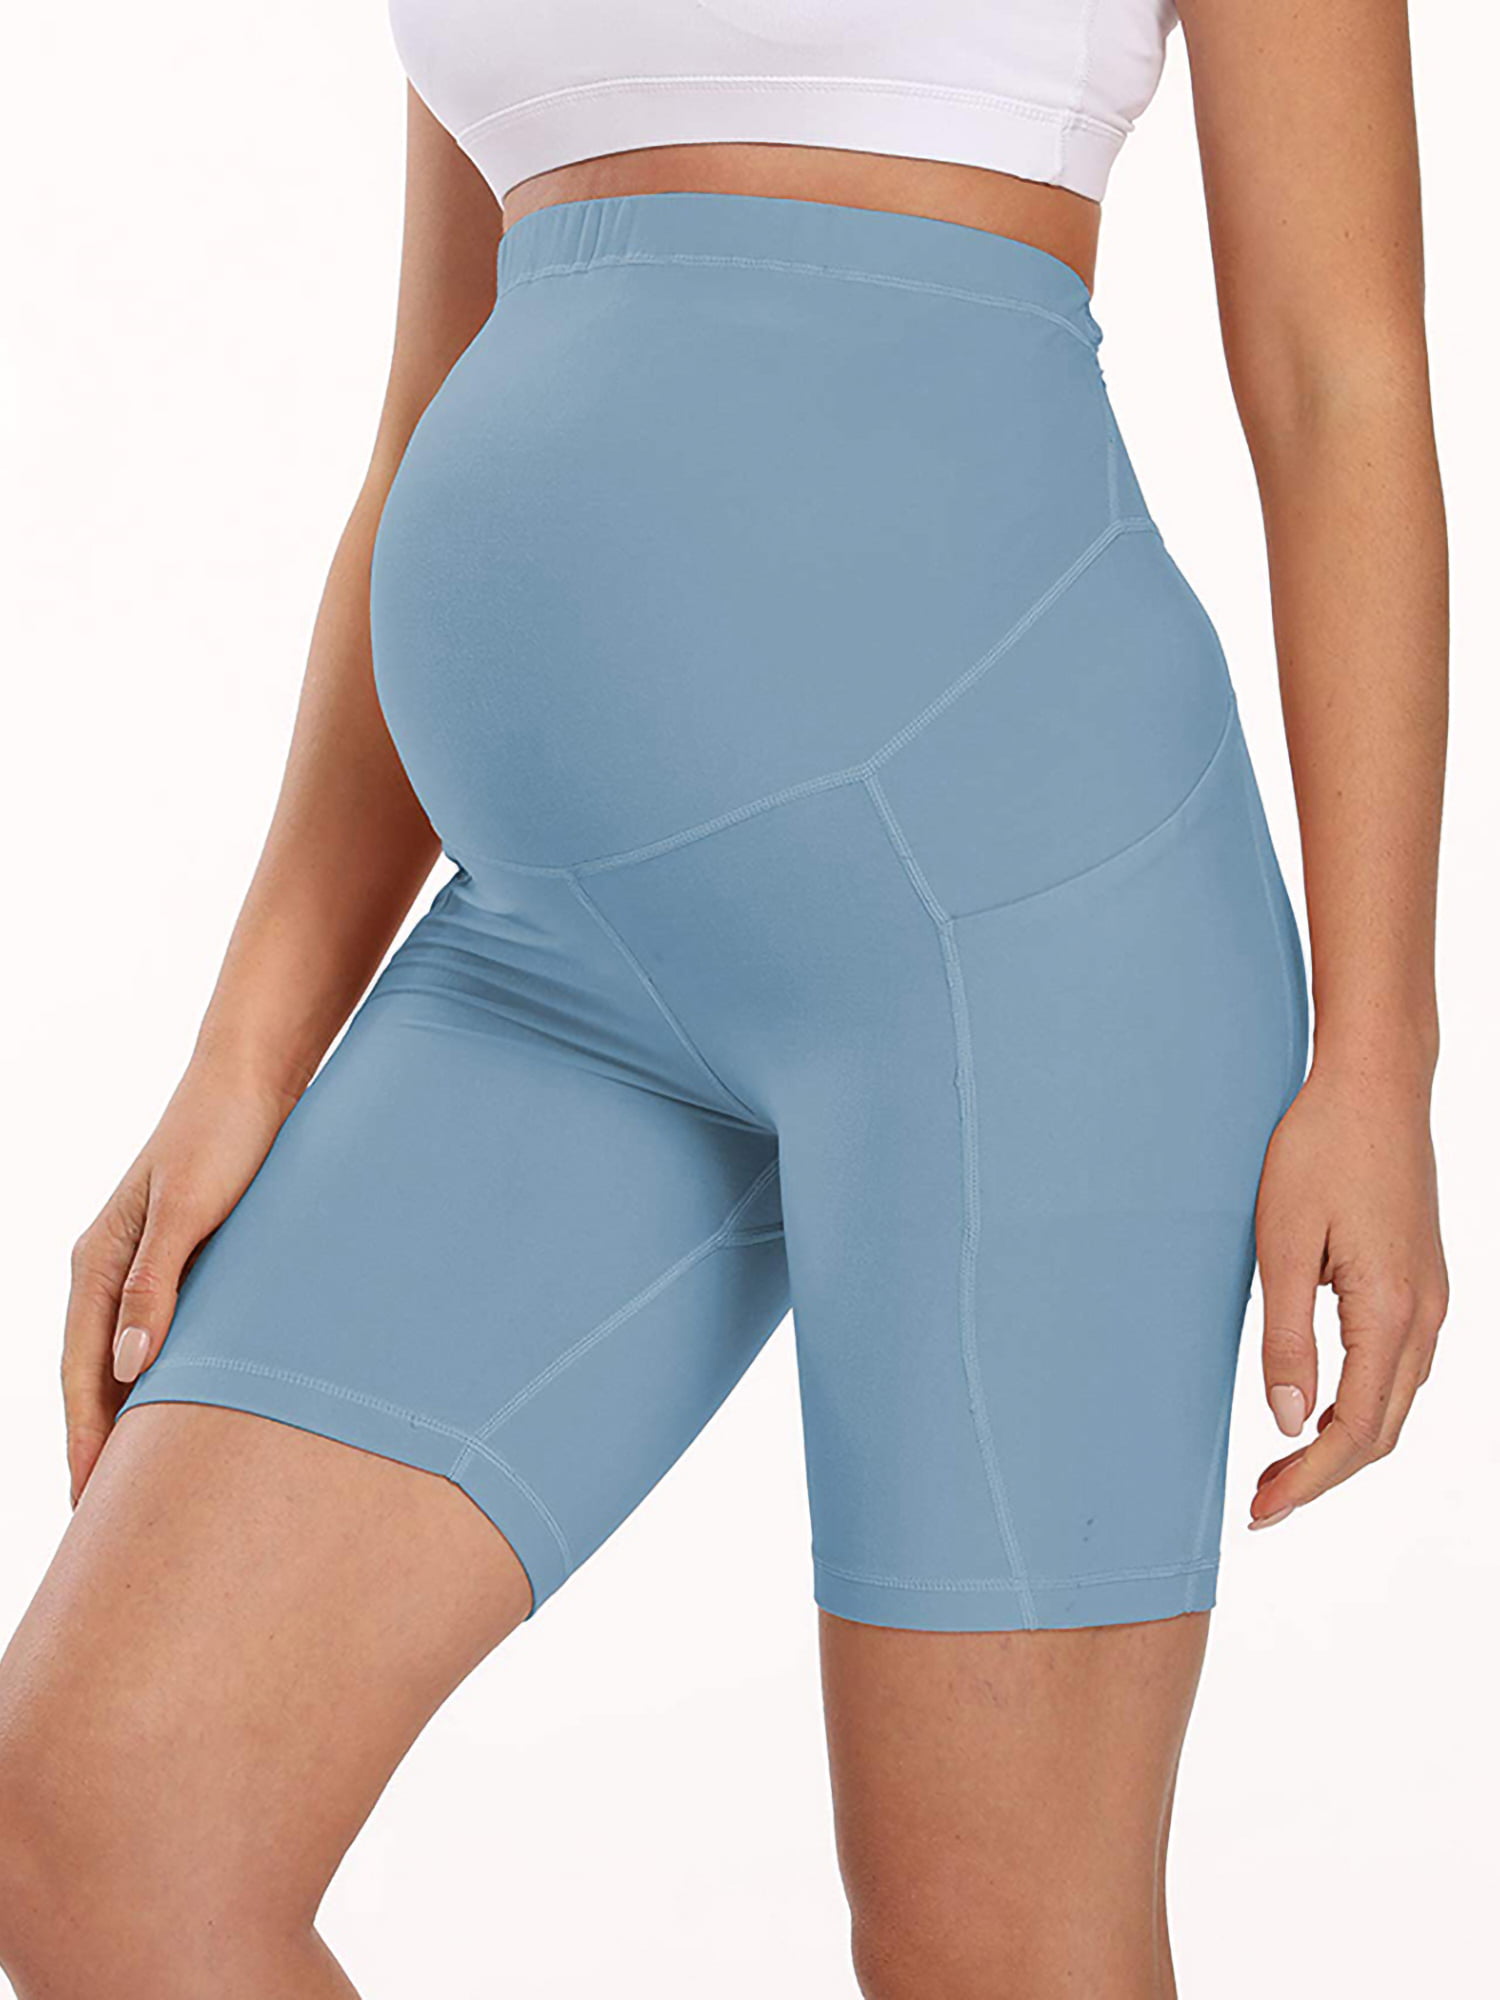 UKAP Ladies Maternity Over The Belly Active Lounge Comfy Yoga Short Pants  Workout Running Athletic Non See-Through Yoga Shorts Pockets 